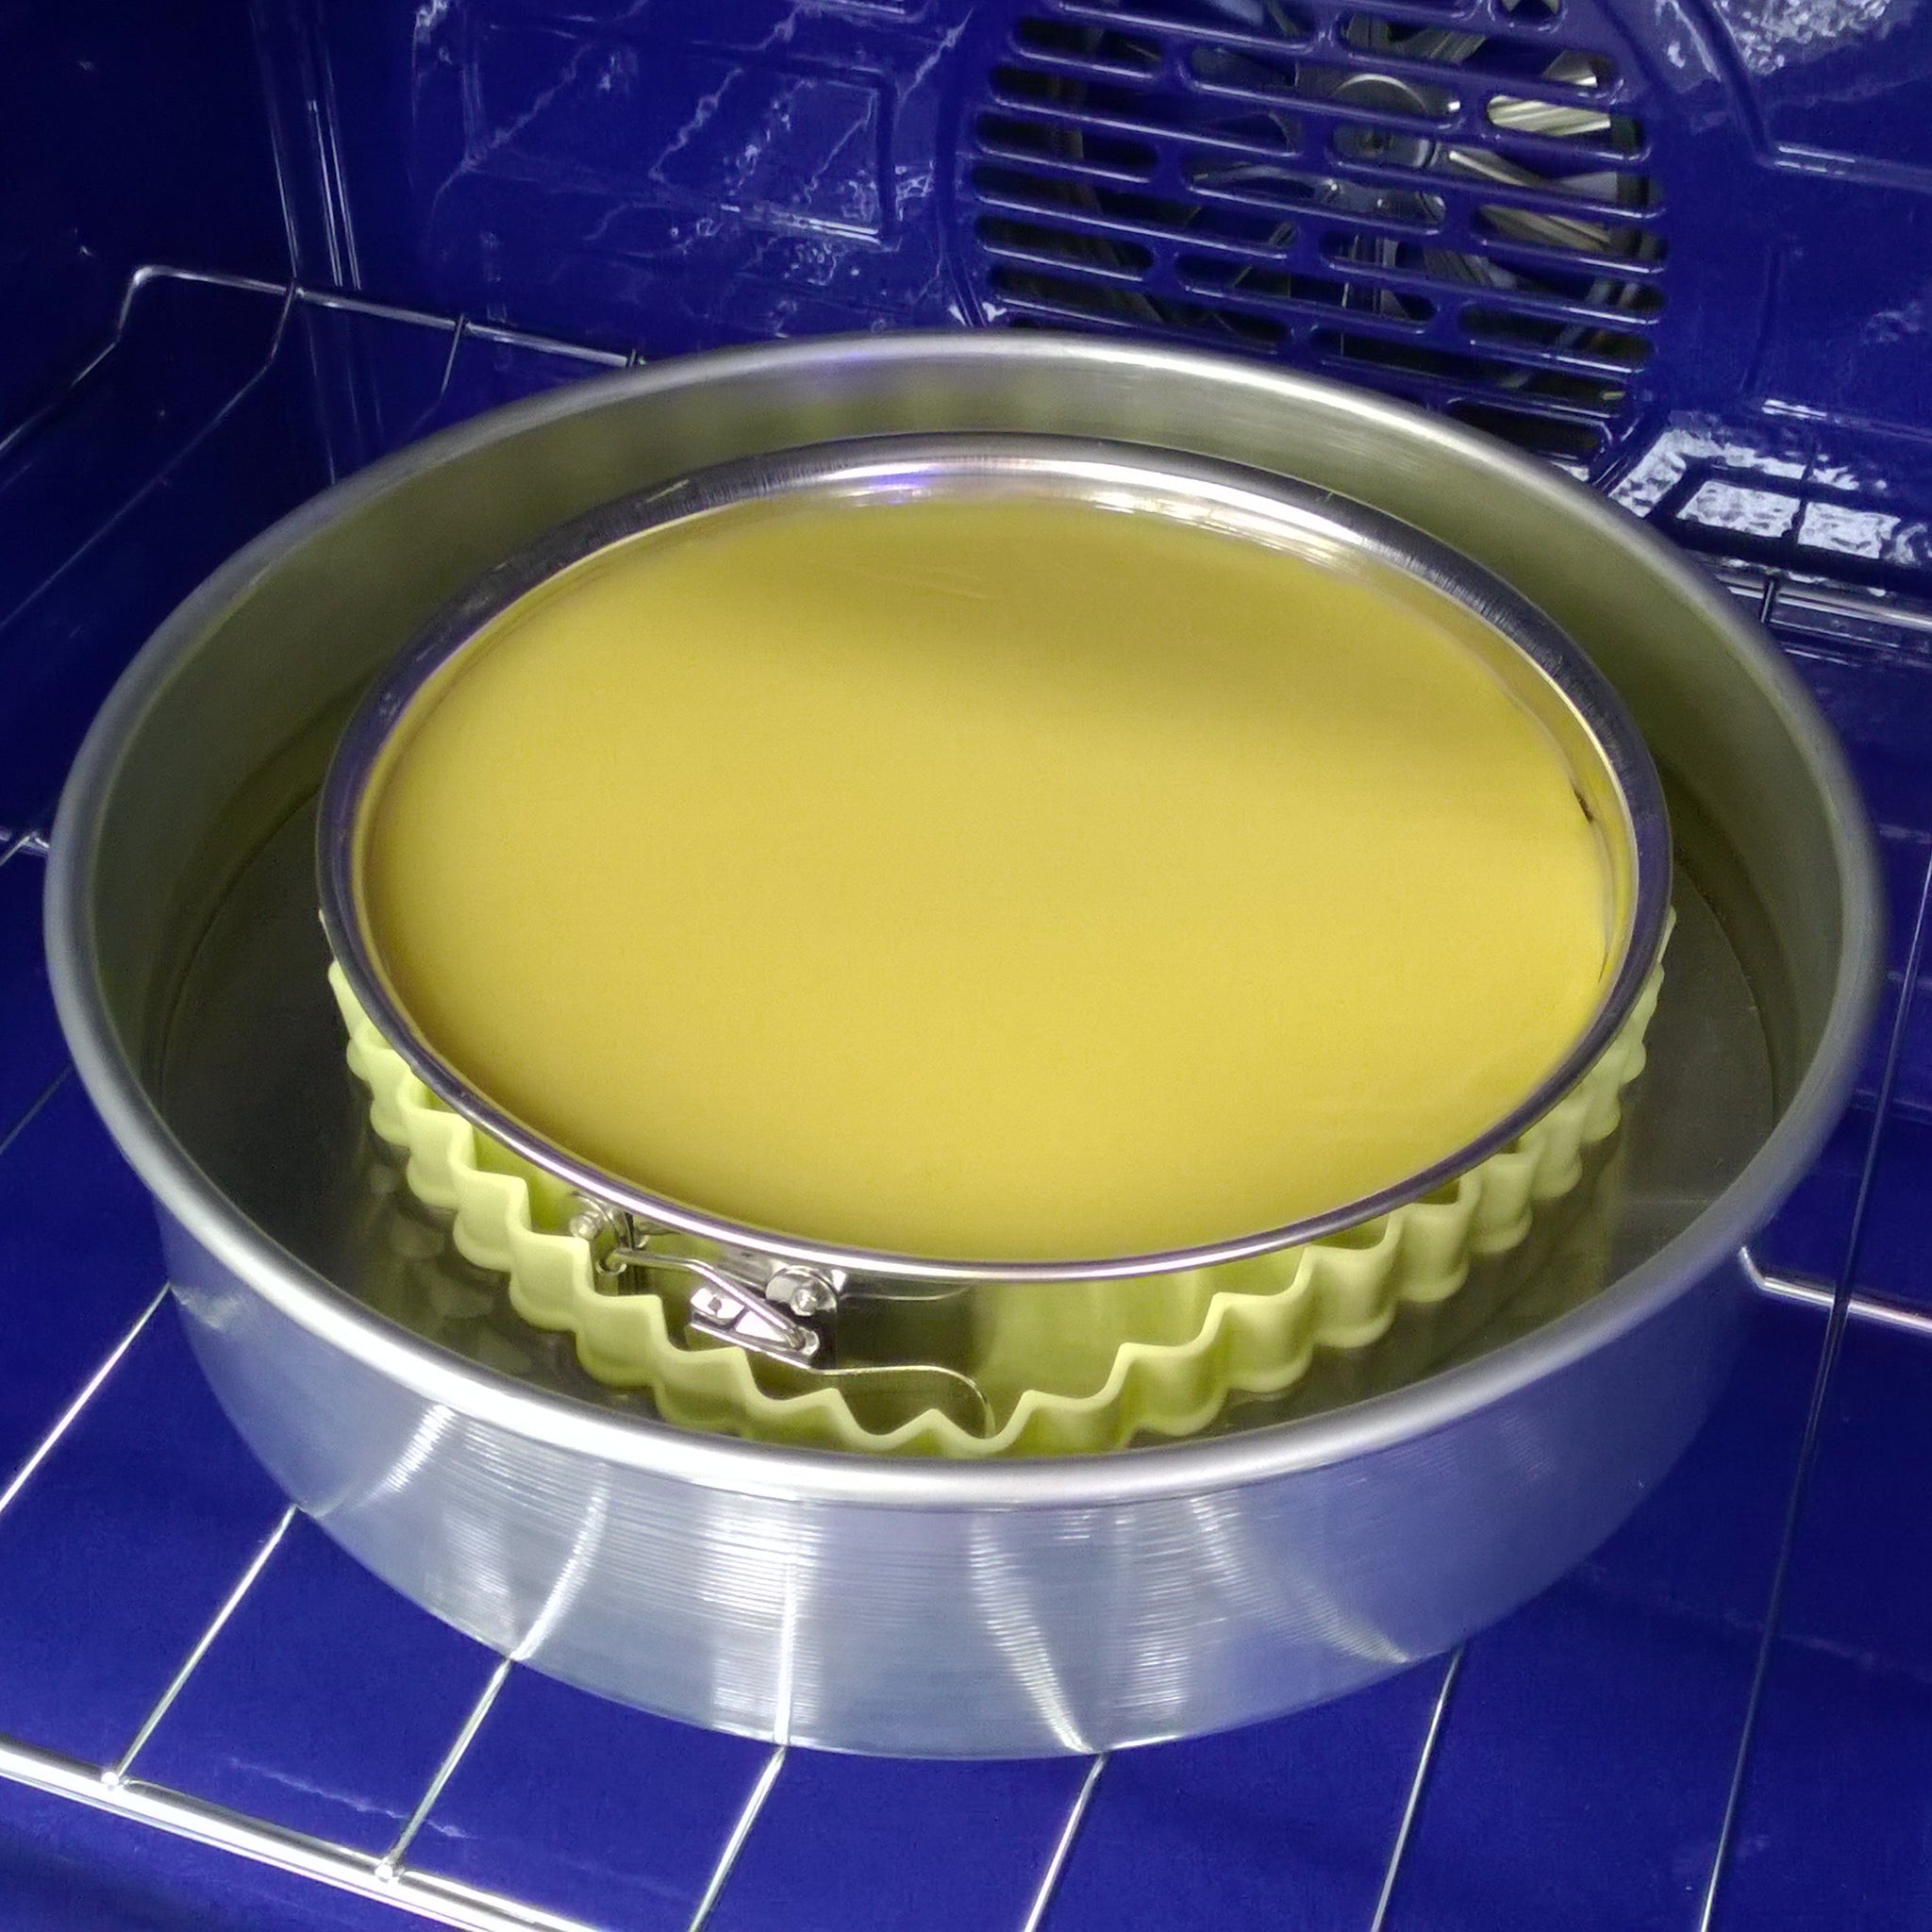 3pcs Cheesecake Pan Protector, Silicone Cheesecake Pan Water Bath Protector for 9 inch Round Springform Pan, Preventing Water from Entering The